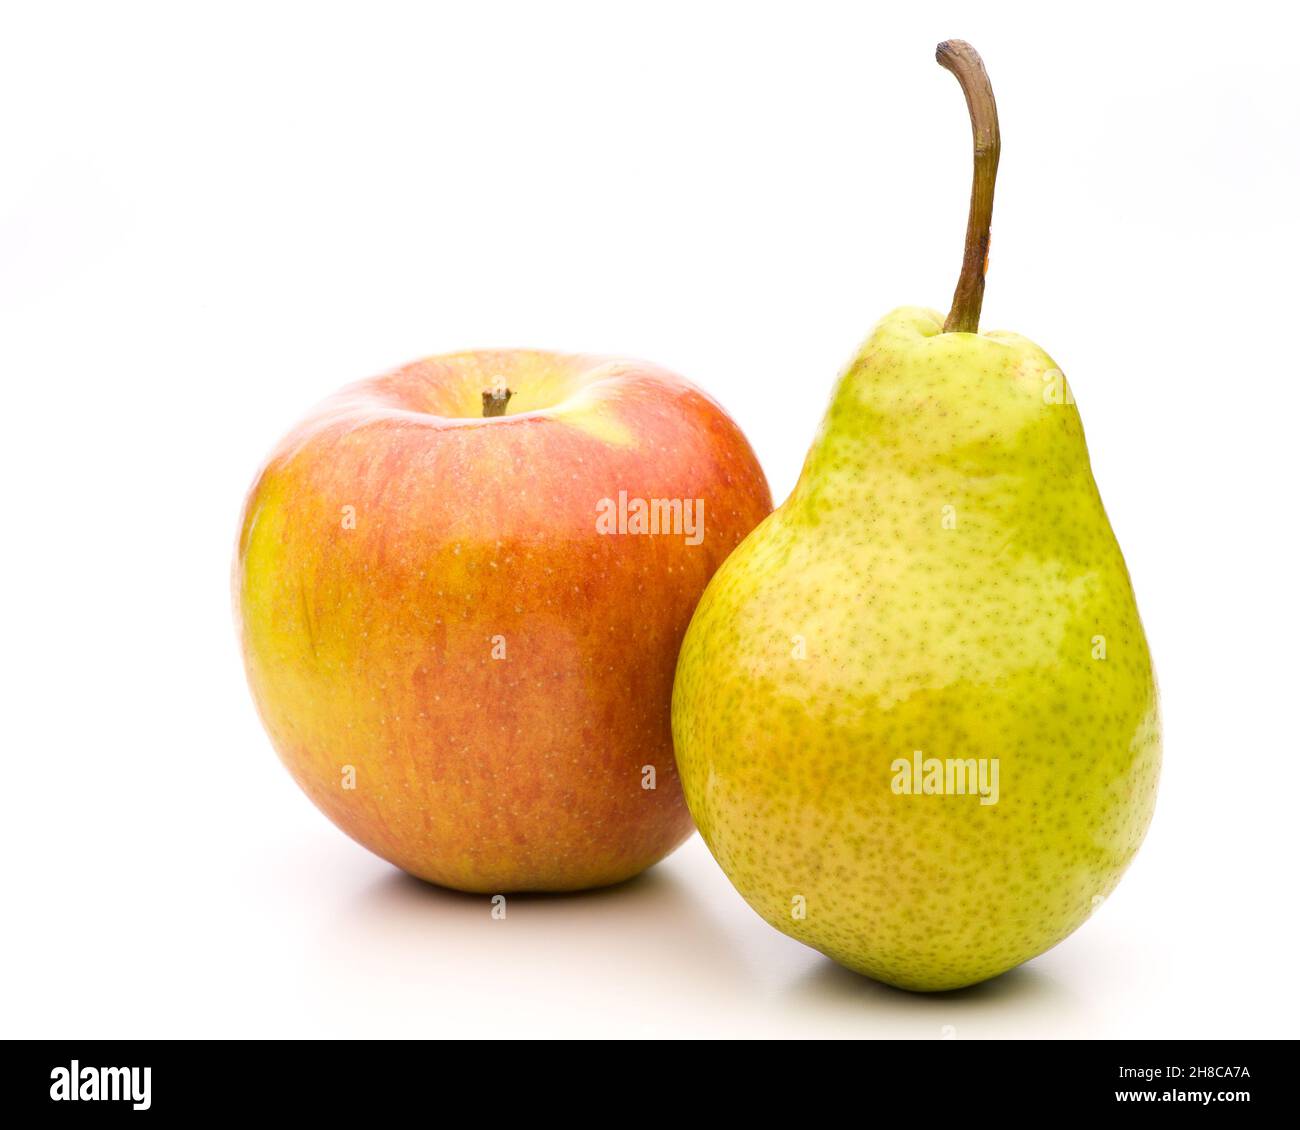 Compare apples with pears - leaning on each other Stock Photo